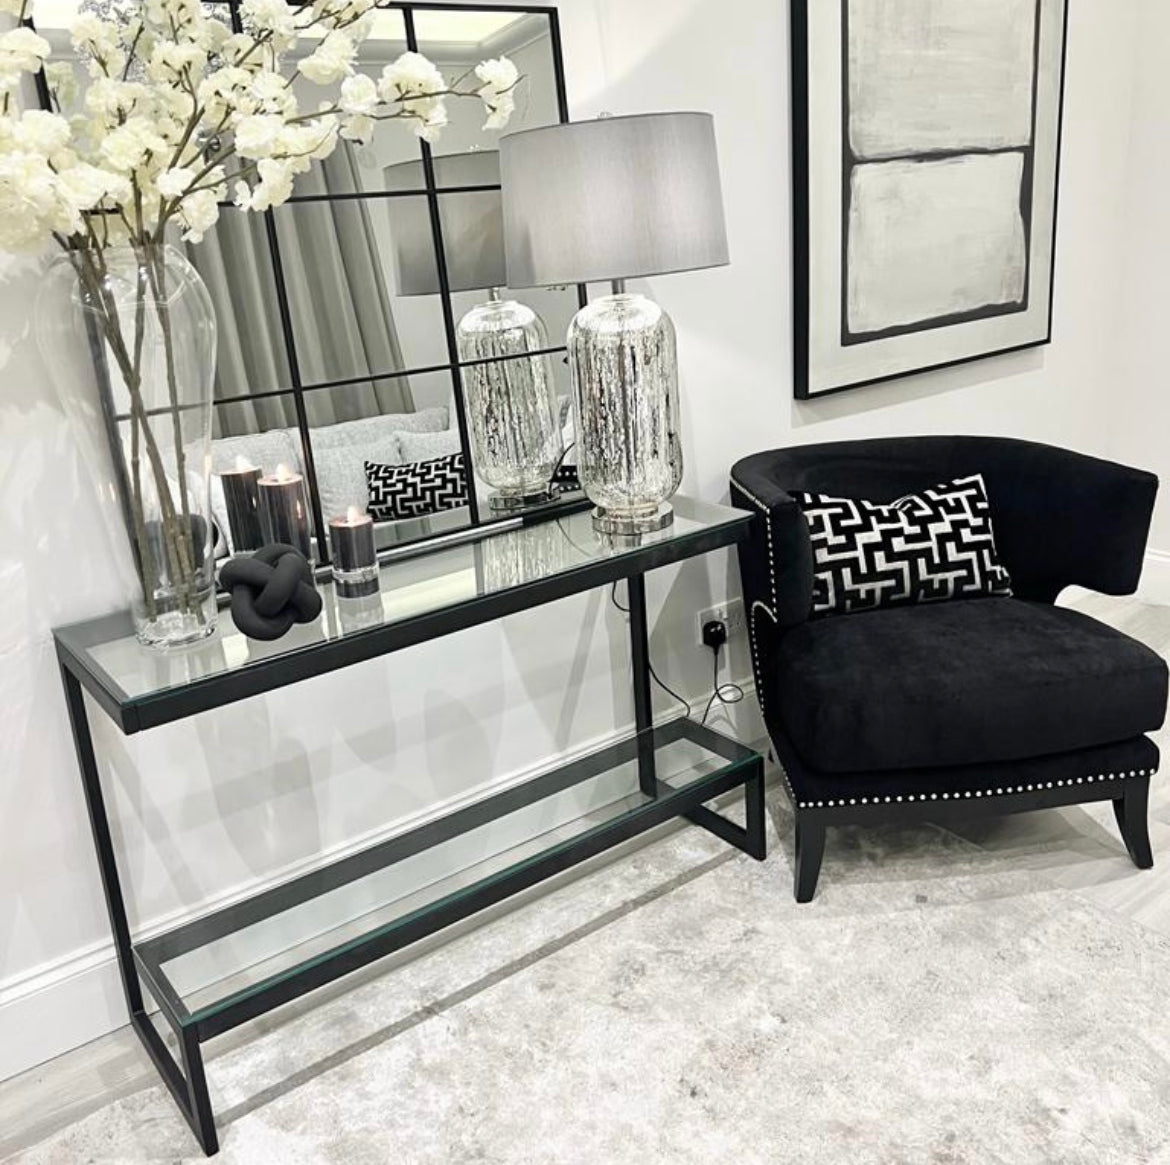 Tides Collection 'G' Black Metal & Glass Console Table